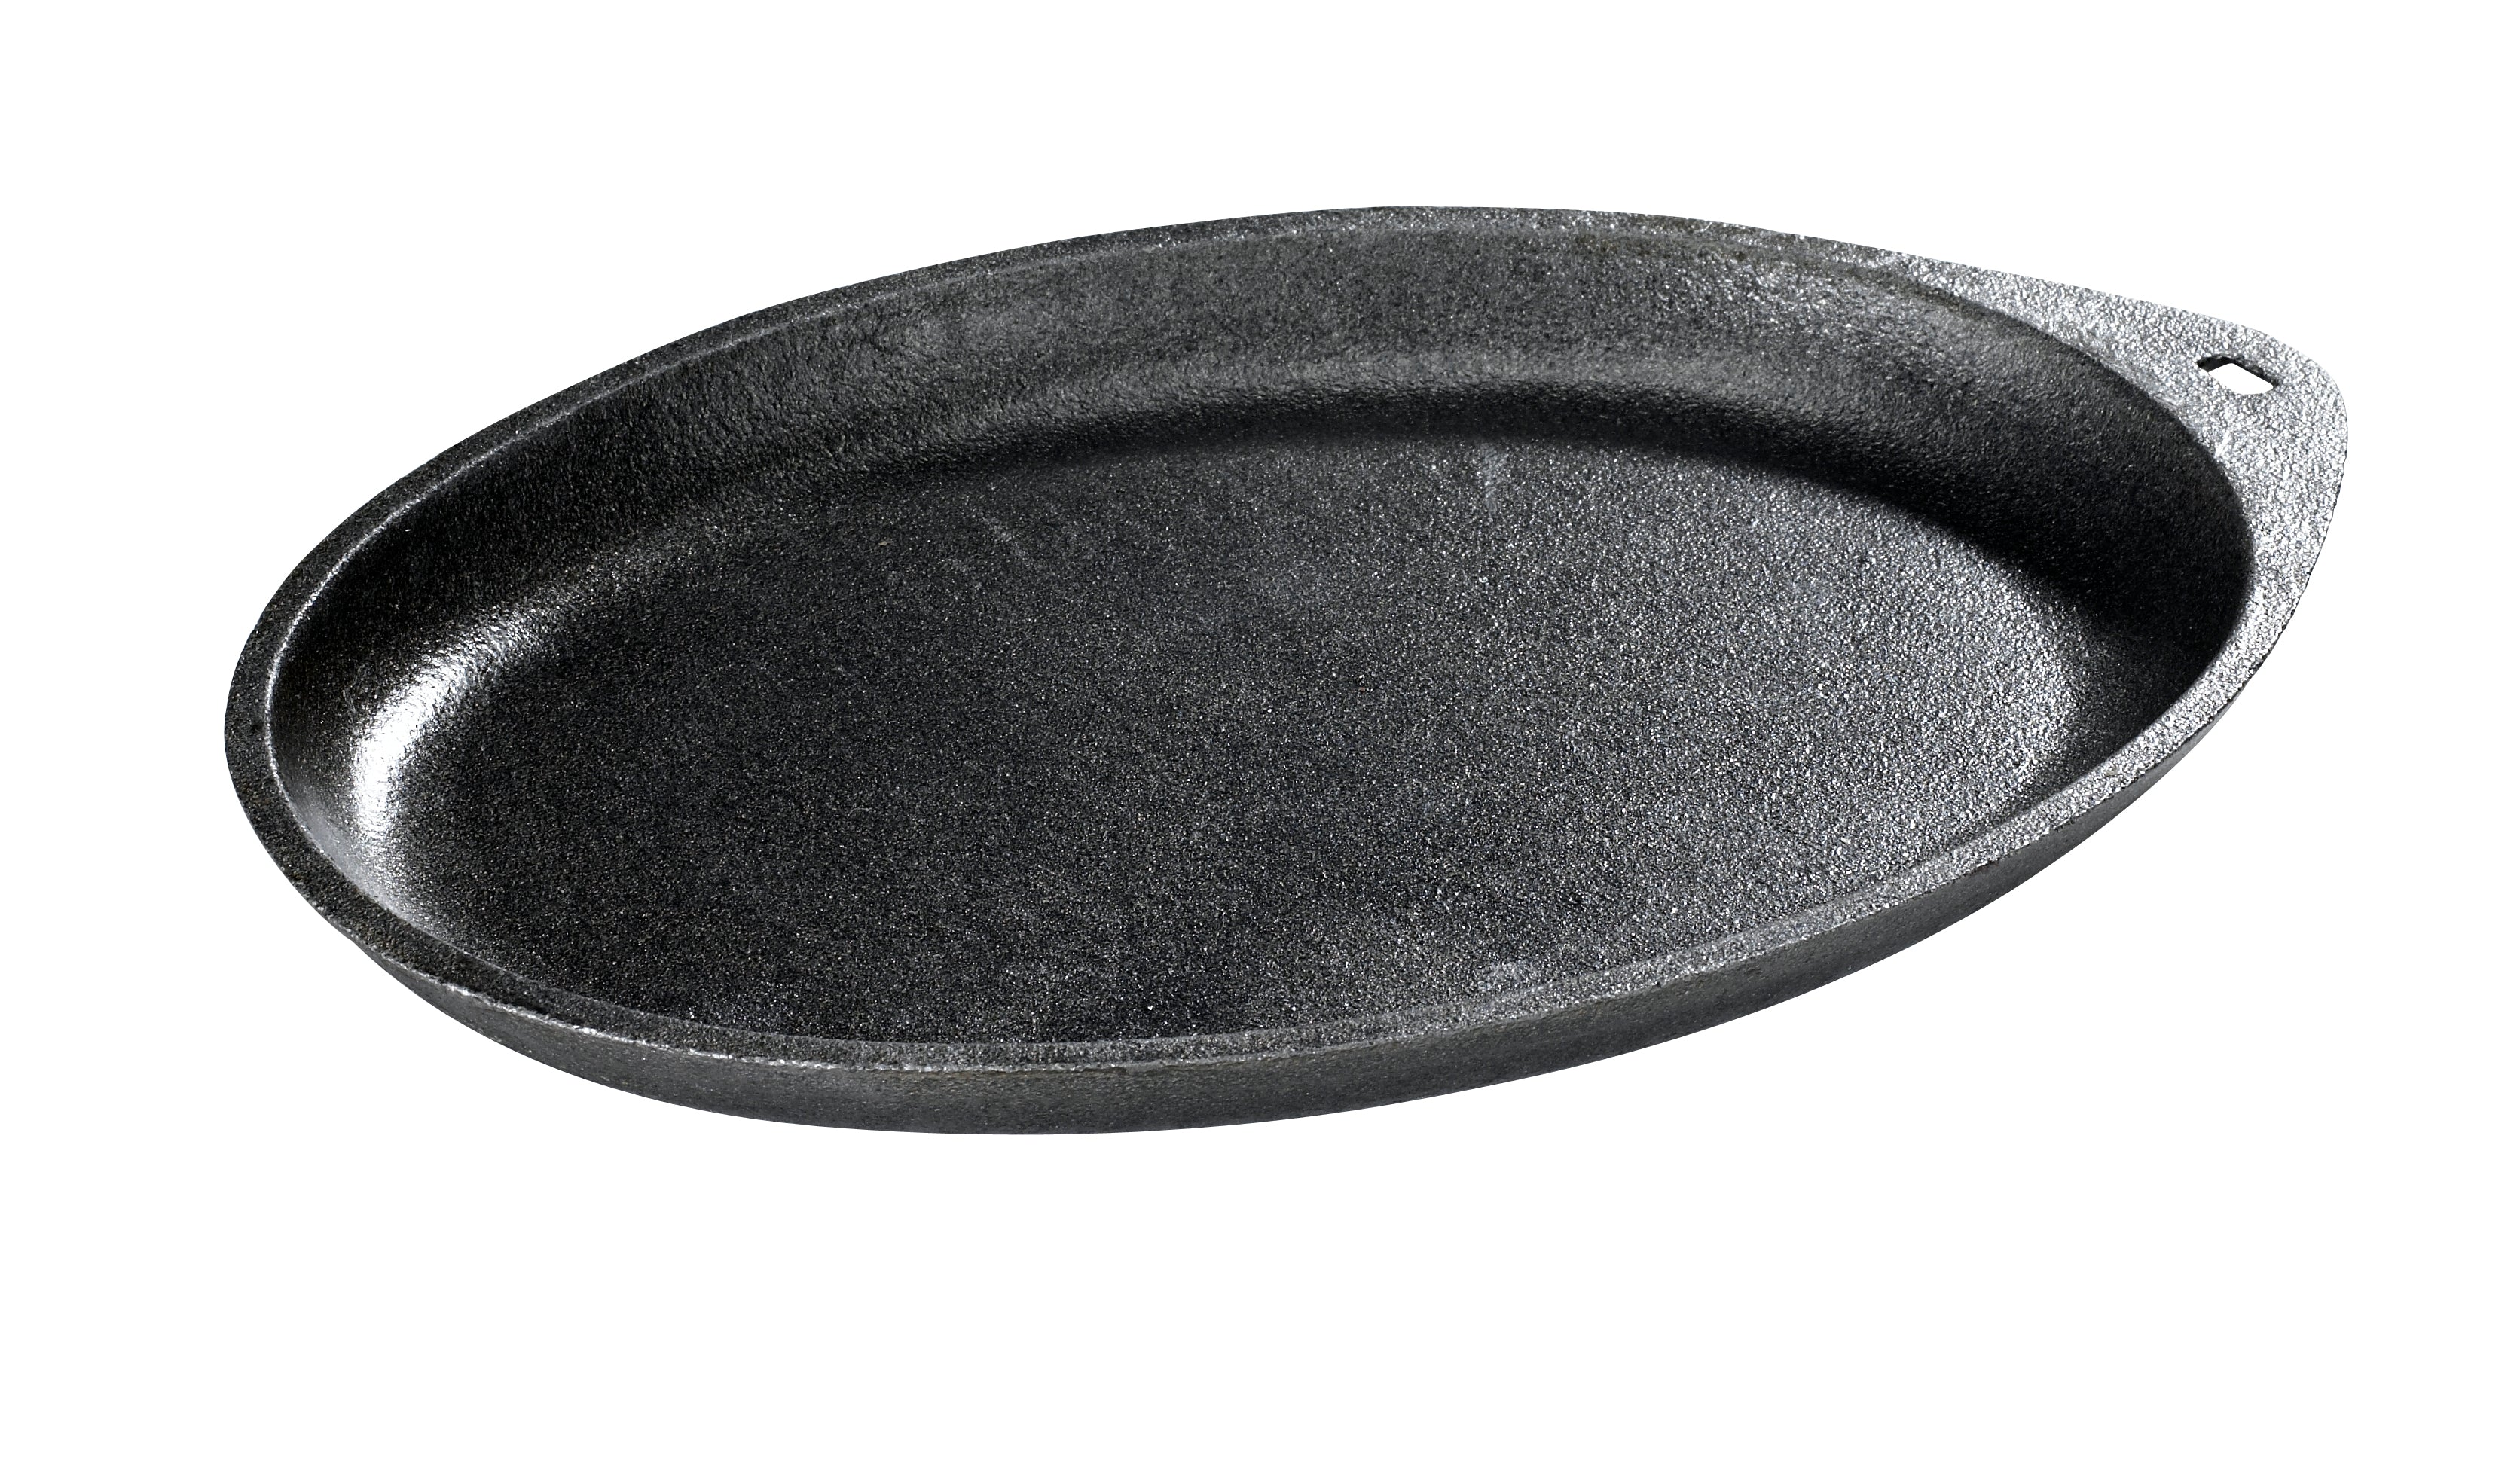 Qstoves Oval Iron Skillet